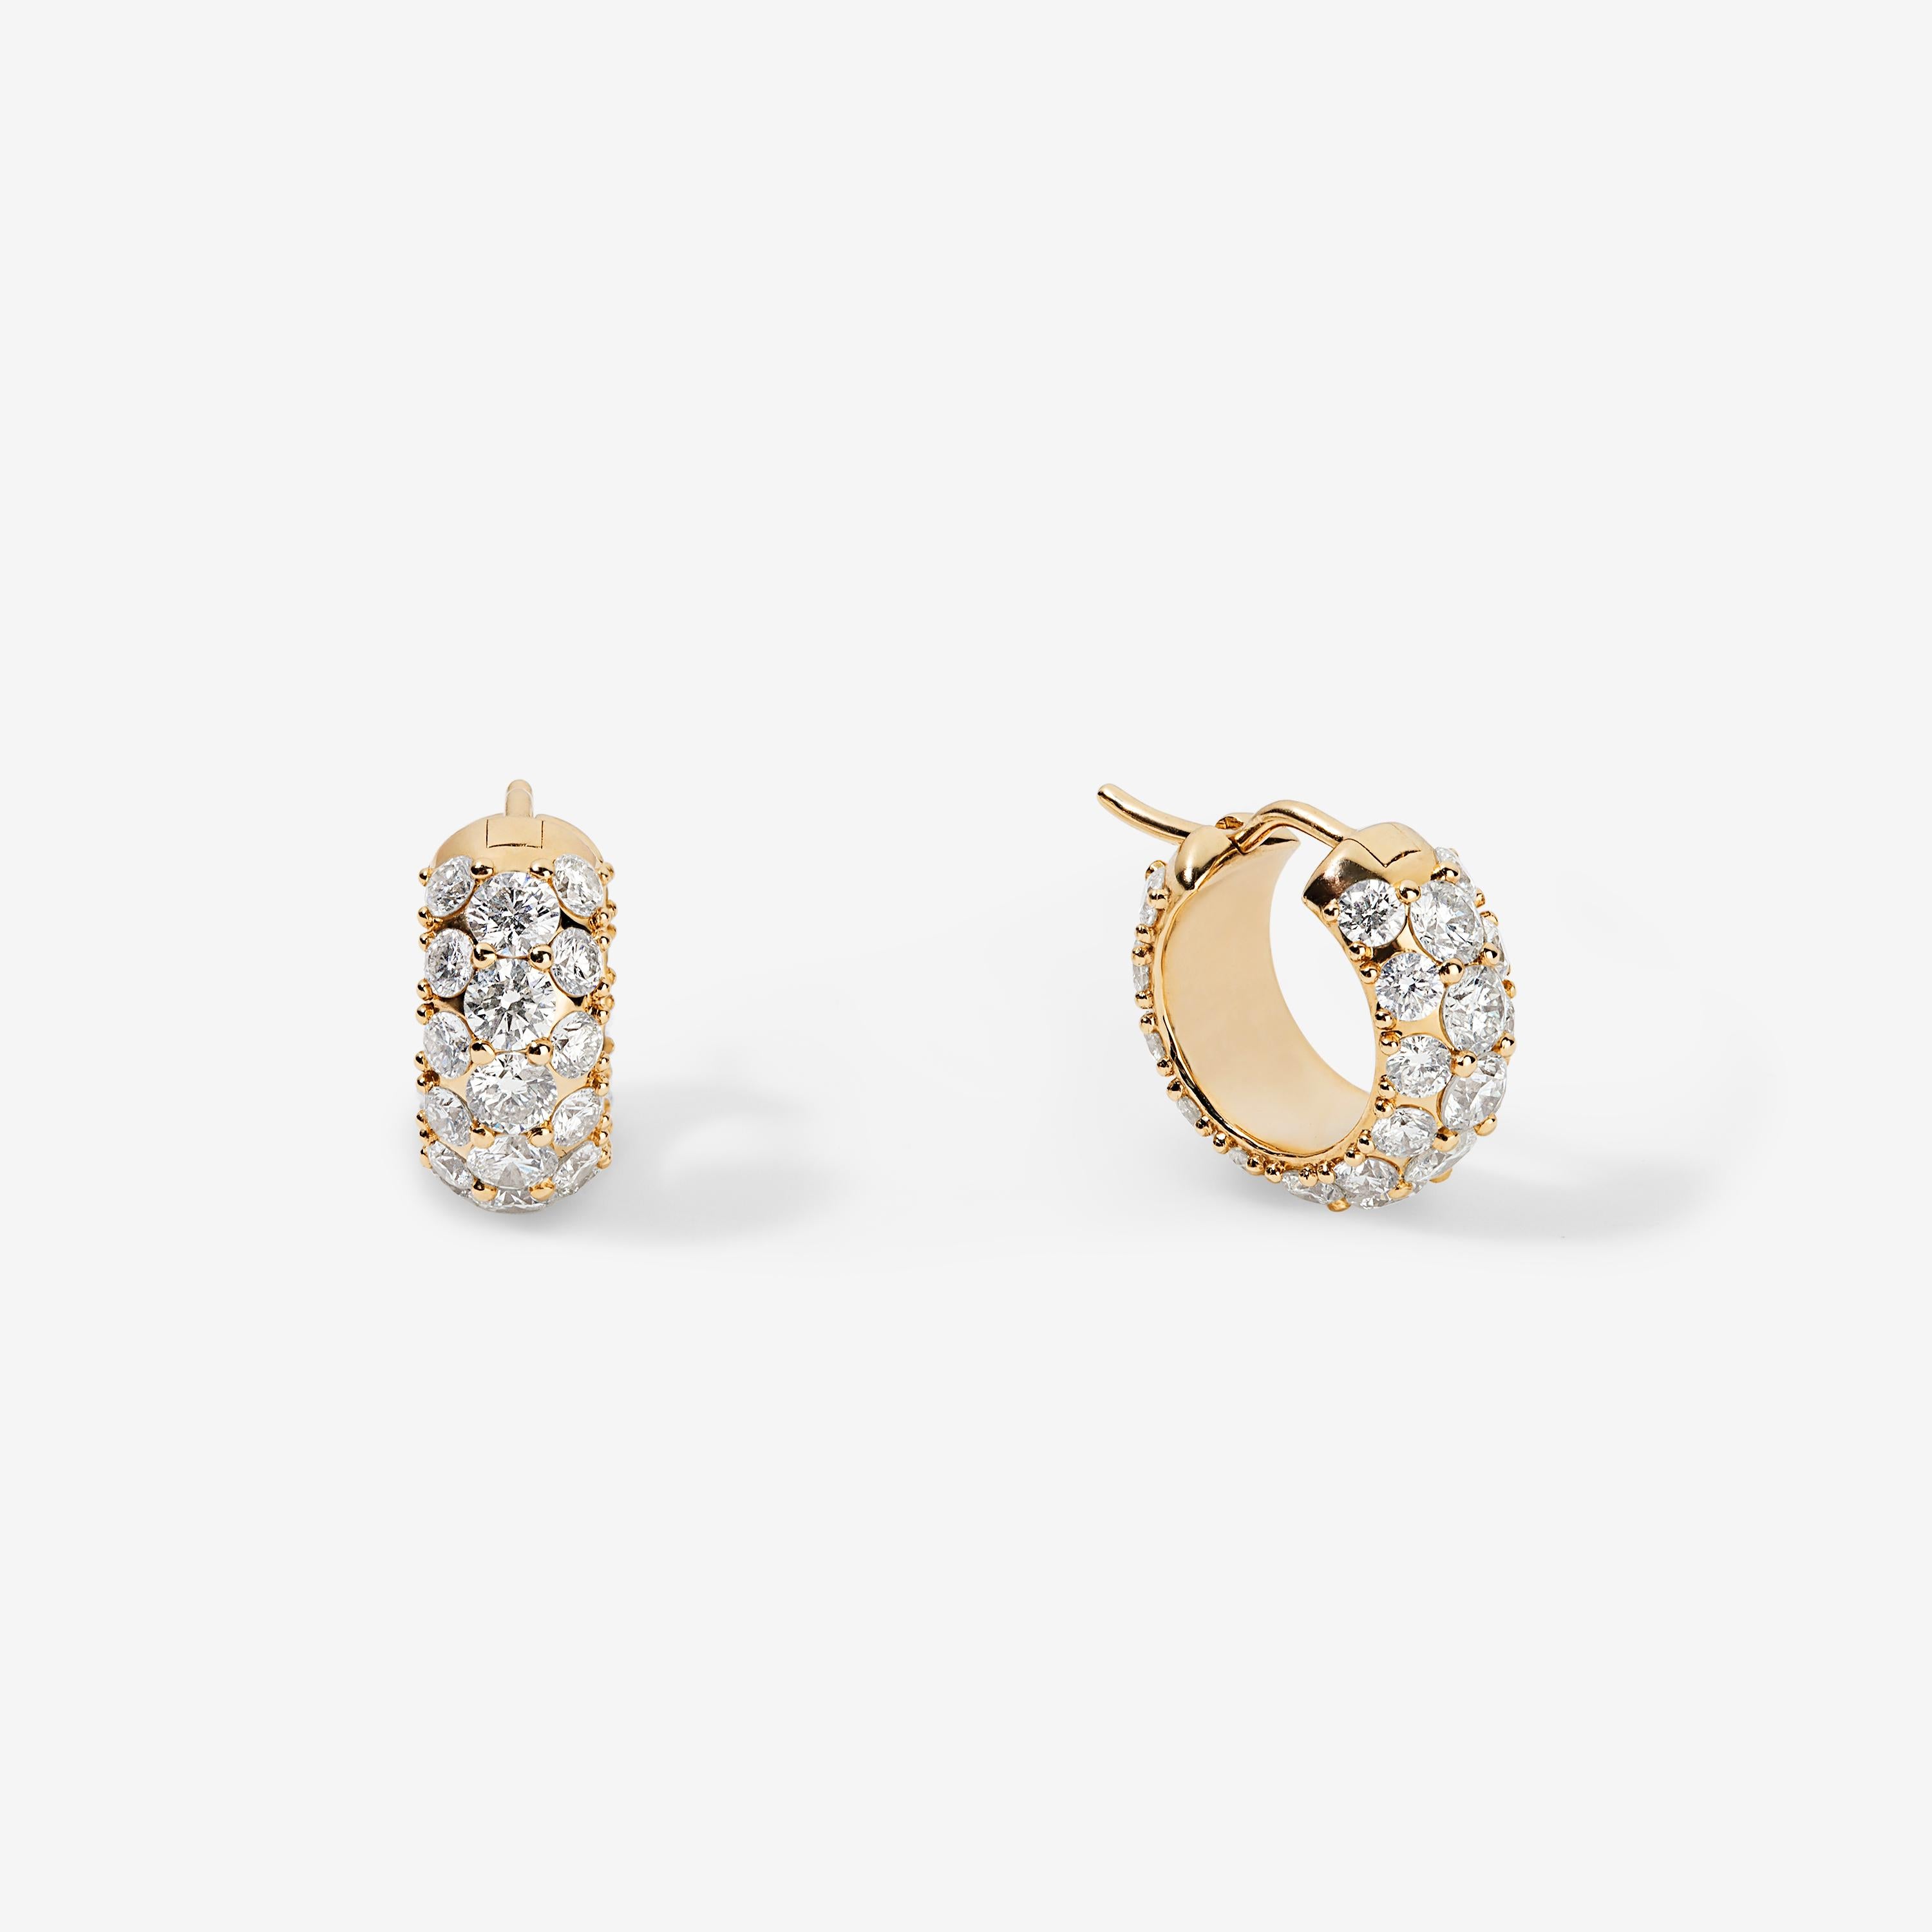 Understated, or a statement? These earrings could go either way. 3 carats of multi-sized GH VS+ natural diamonds shimmer all the way around a domed hoop that hugs the lobe. Set in solid 14k yellow gold.

Luxuriously weighted, but still